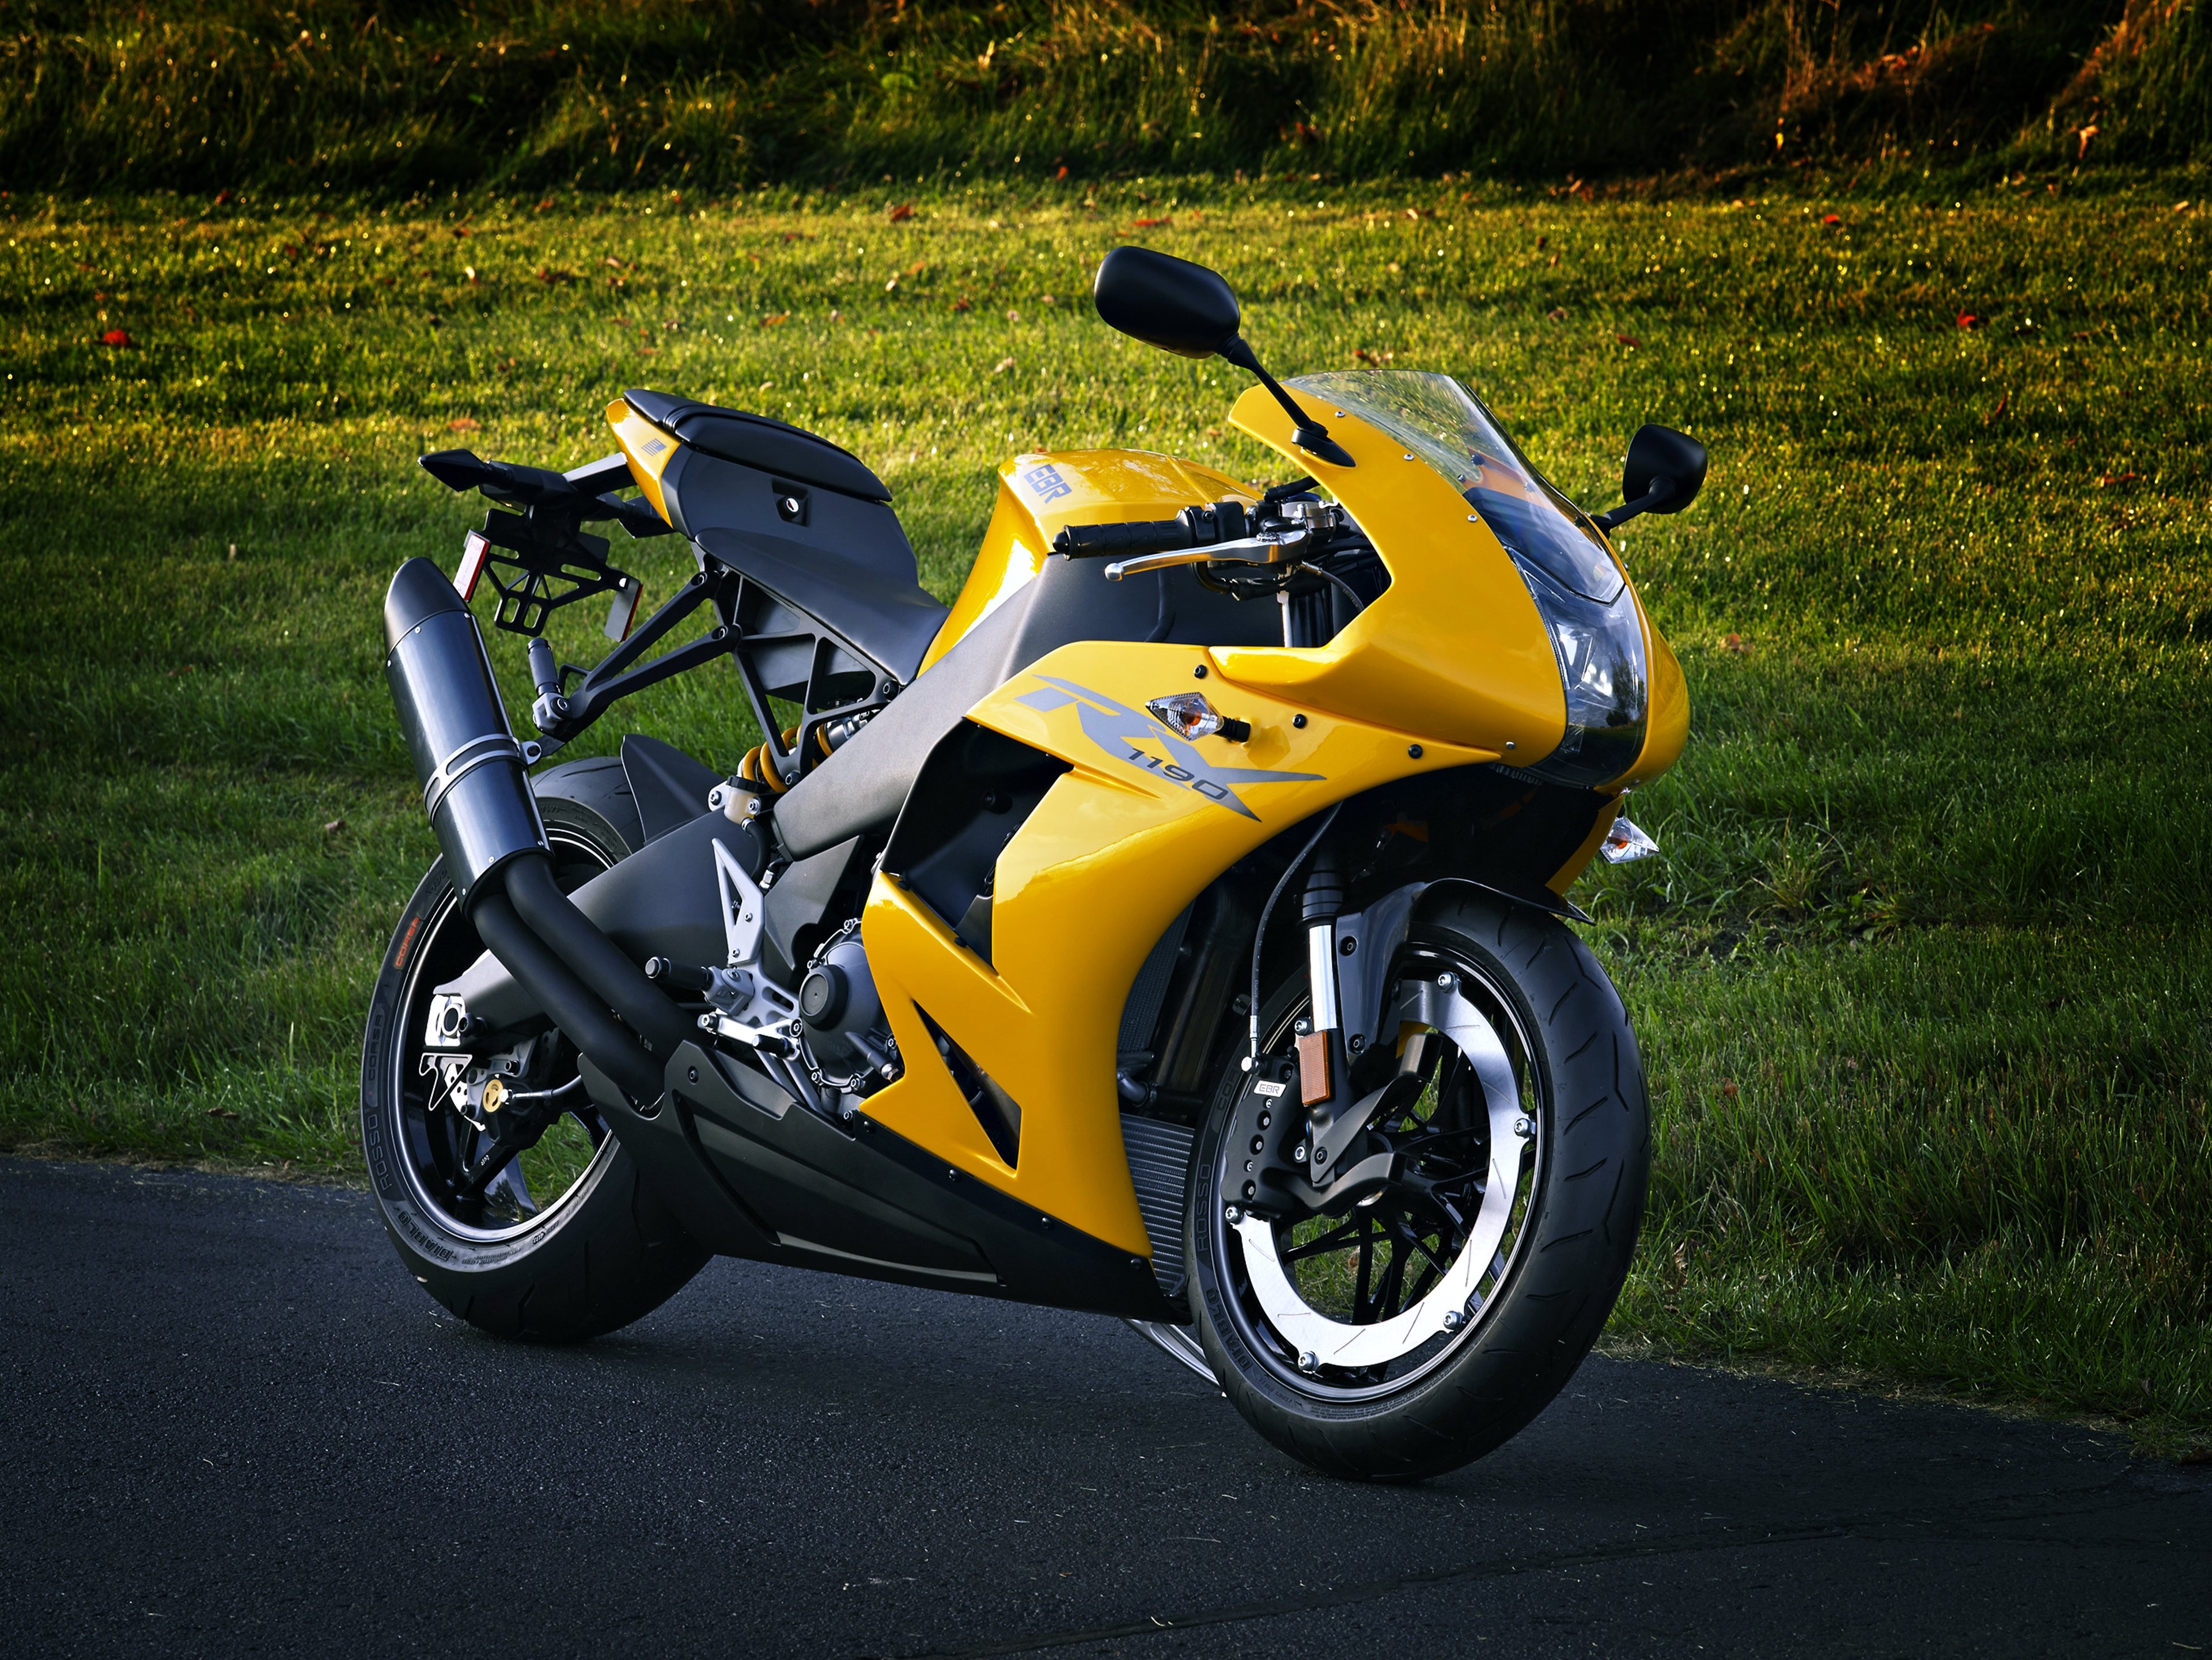 ebr, 1198rx, Yellow, Bike, Motorcycles, Grass, Landscapes, Nature, Earth, Race, Sports, Motors, Speed Wallpaper